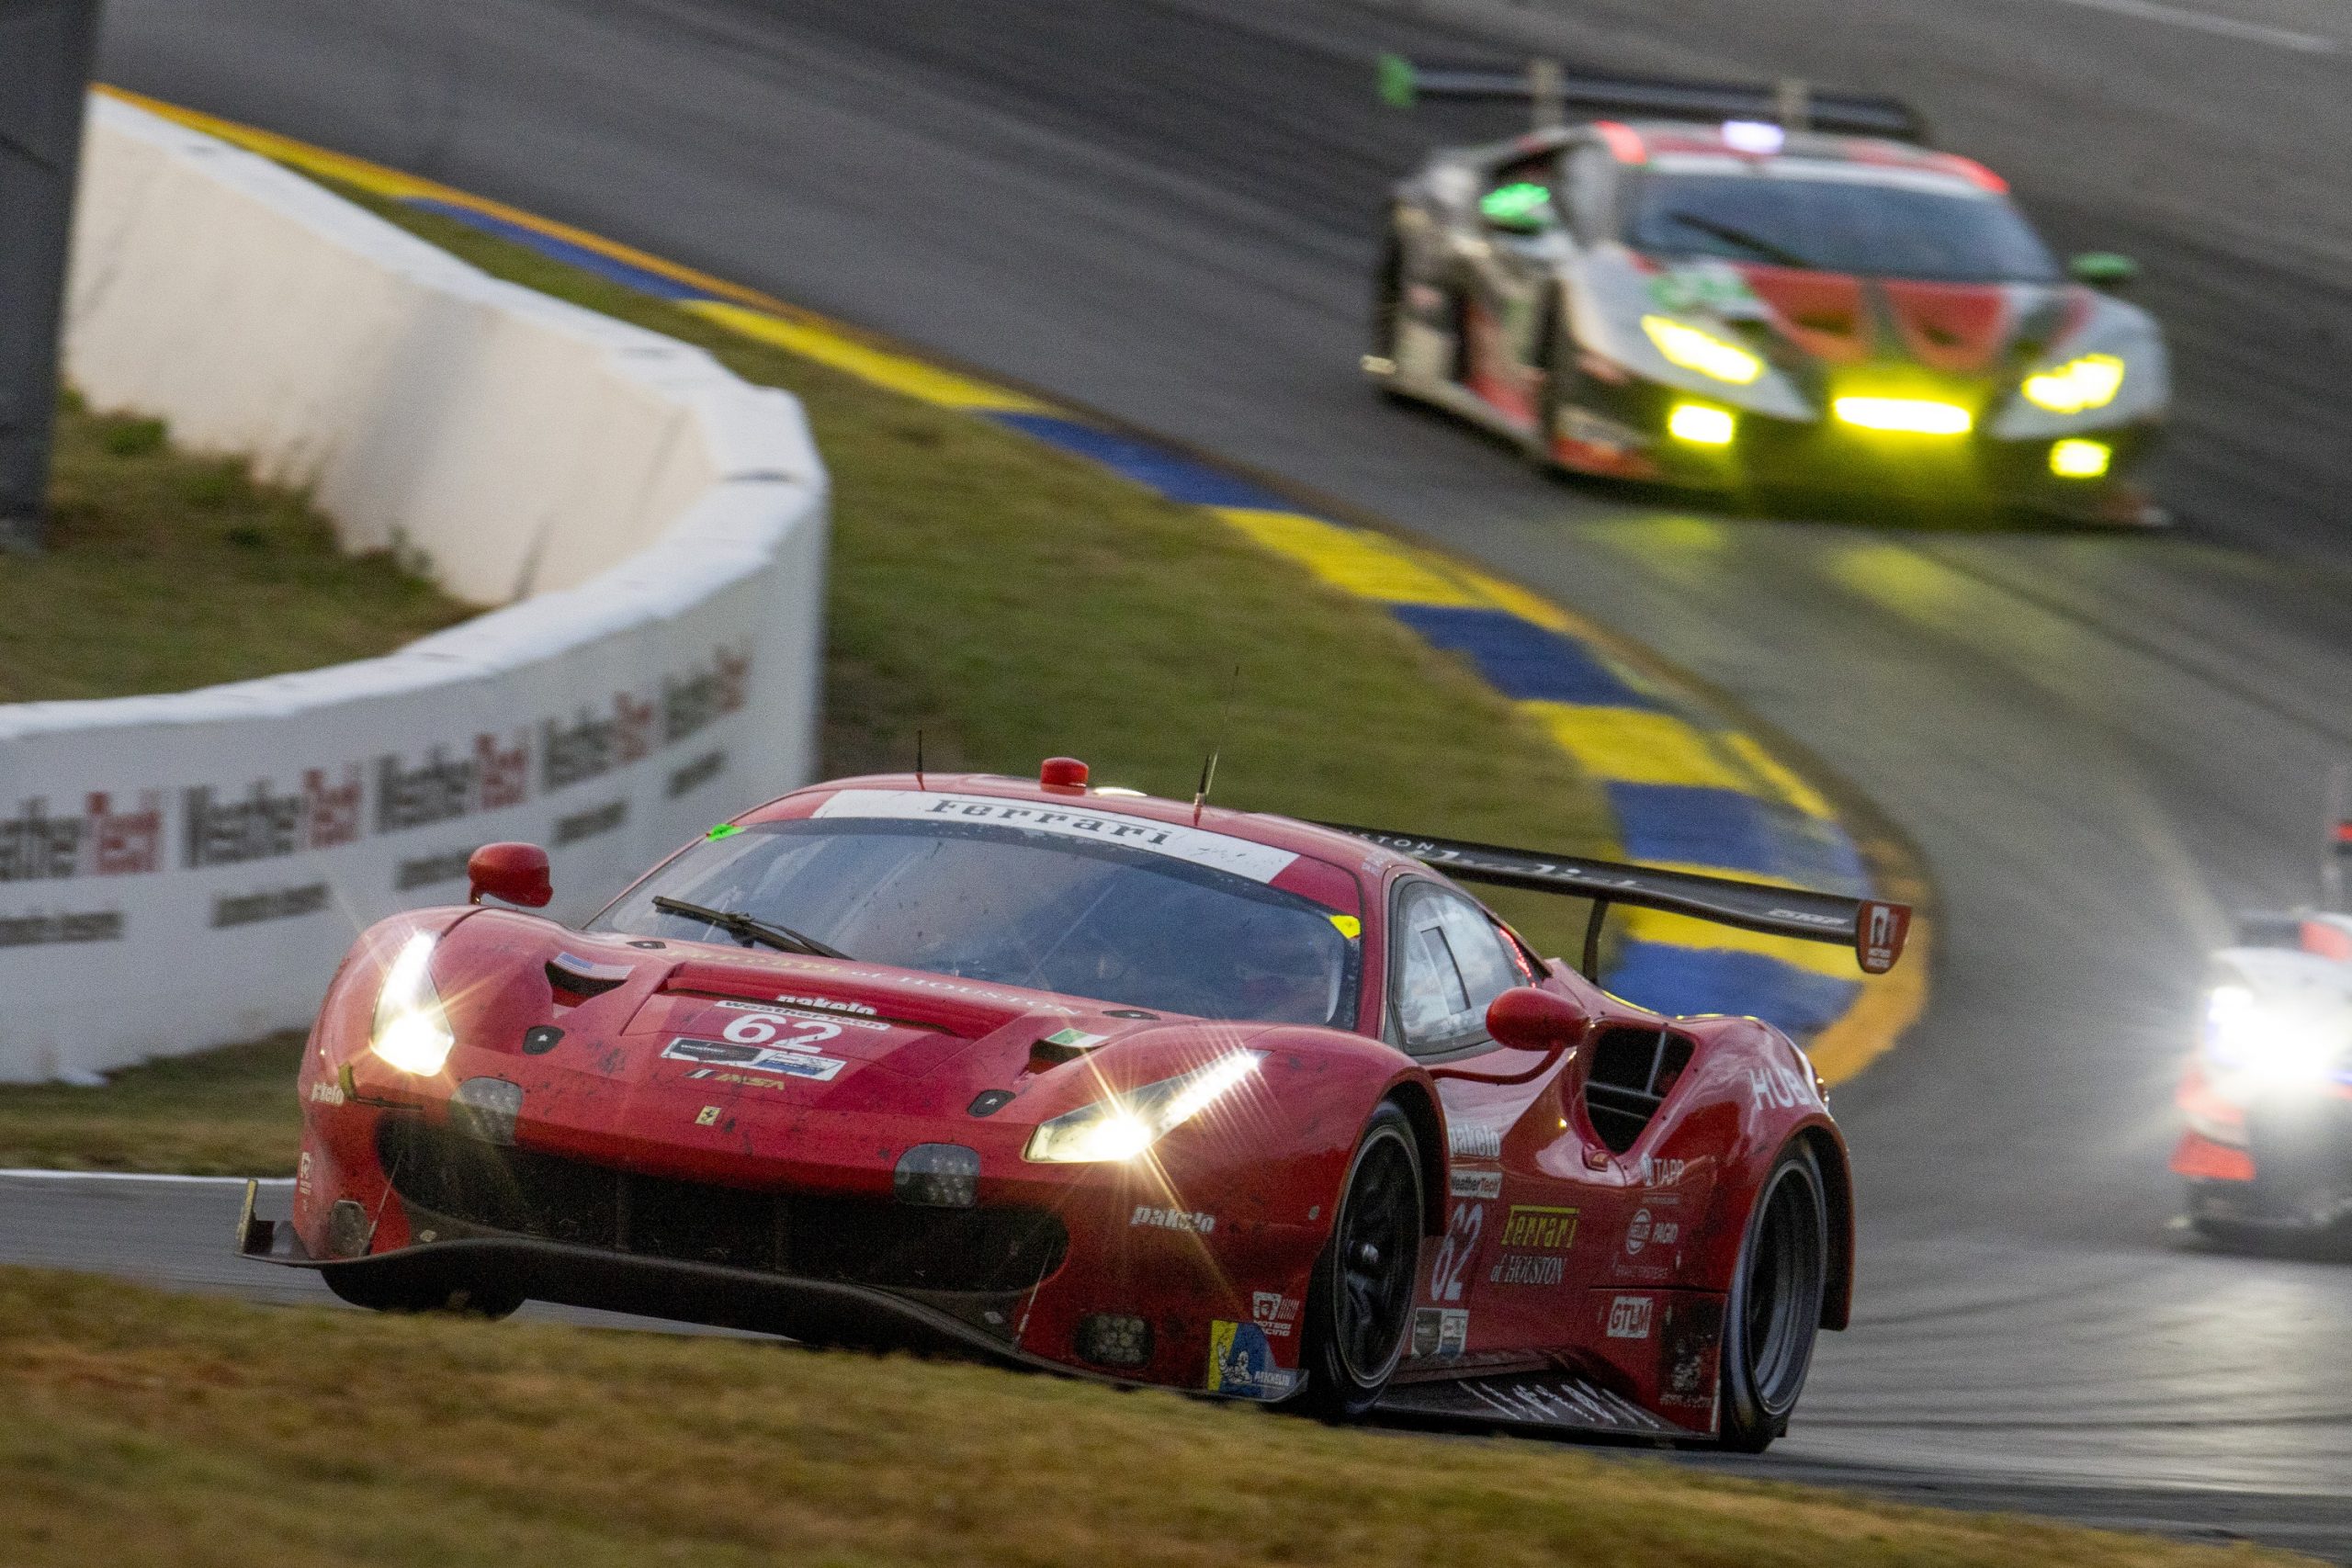 A Ferrari 488 GTLM car in red during the Petit Le Mans race in 2019